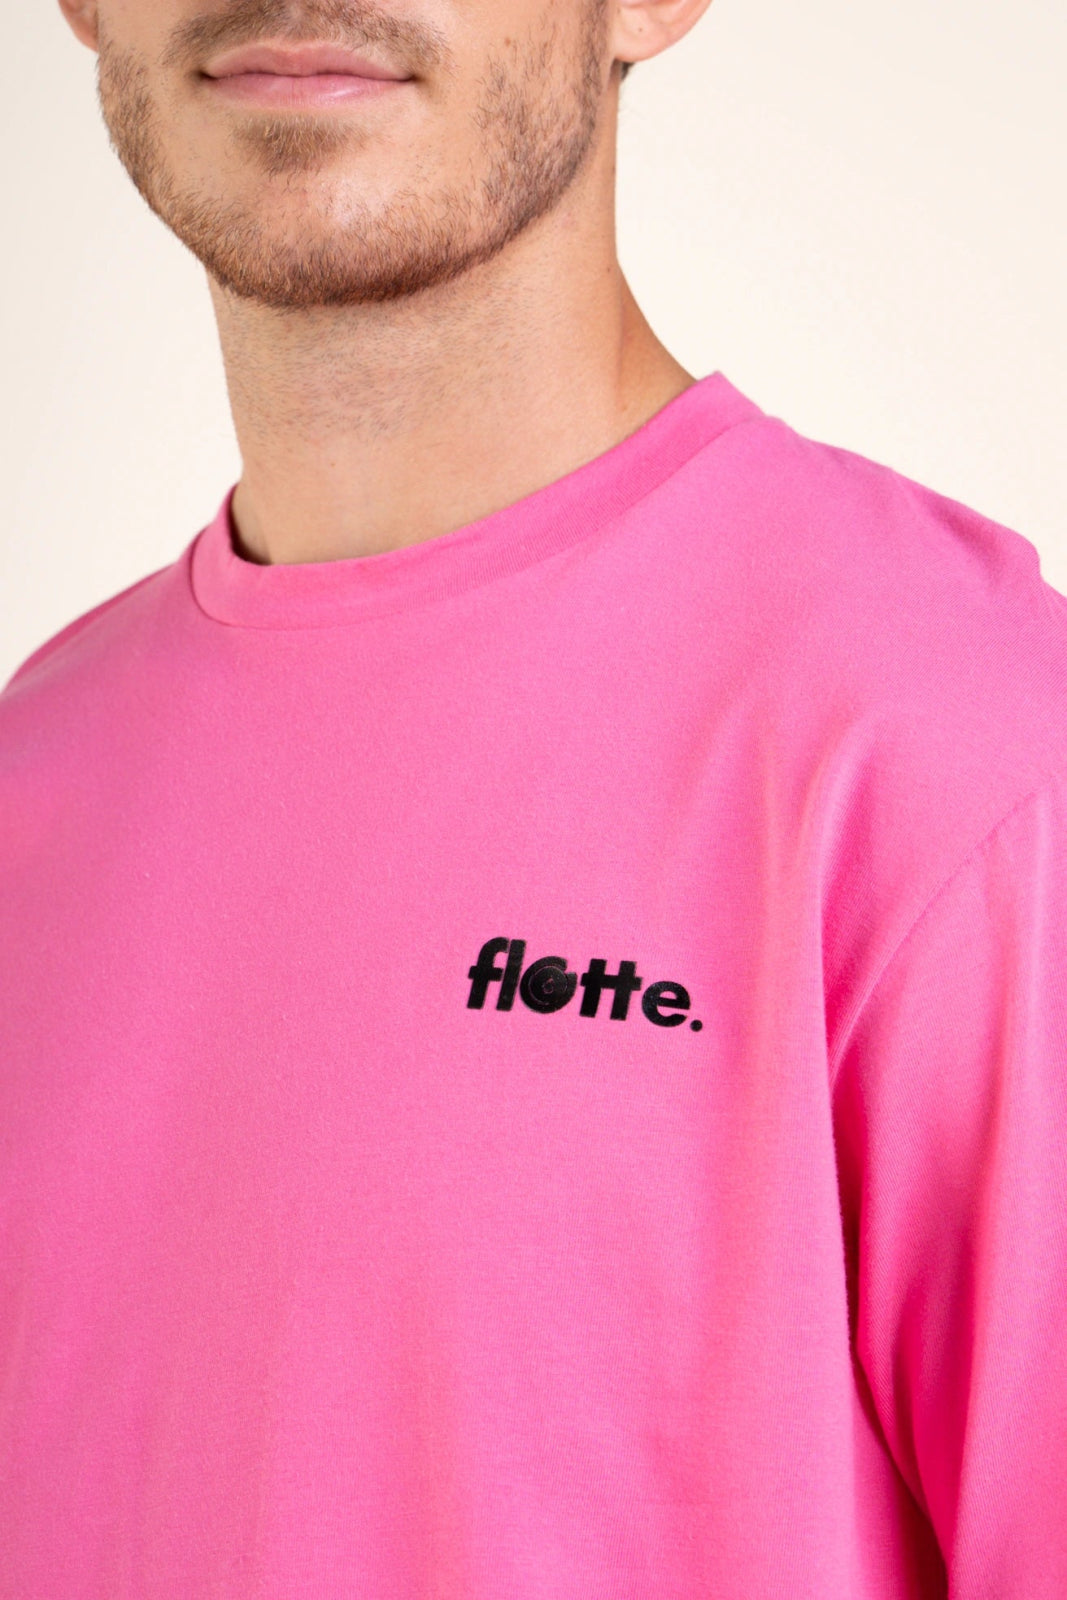 Temple water-repellent T-shirt in 100% cotton, made in Portugal #couleur_bonbon